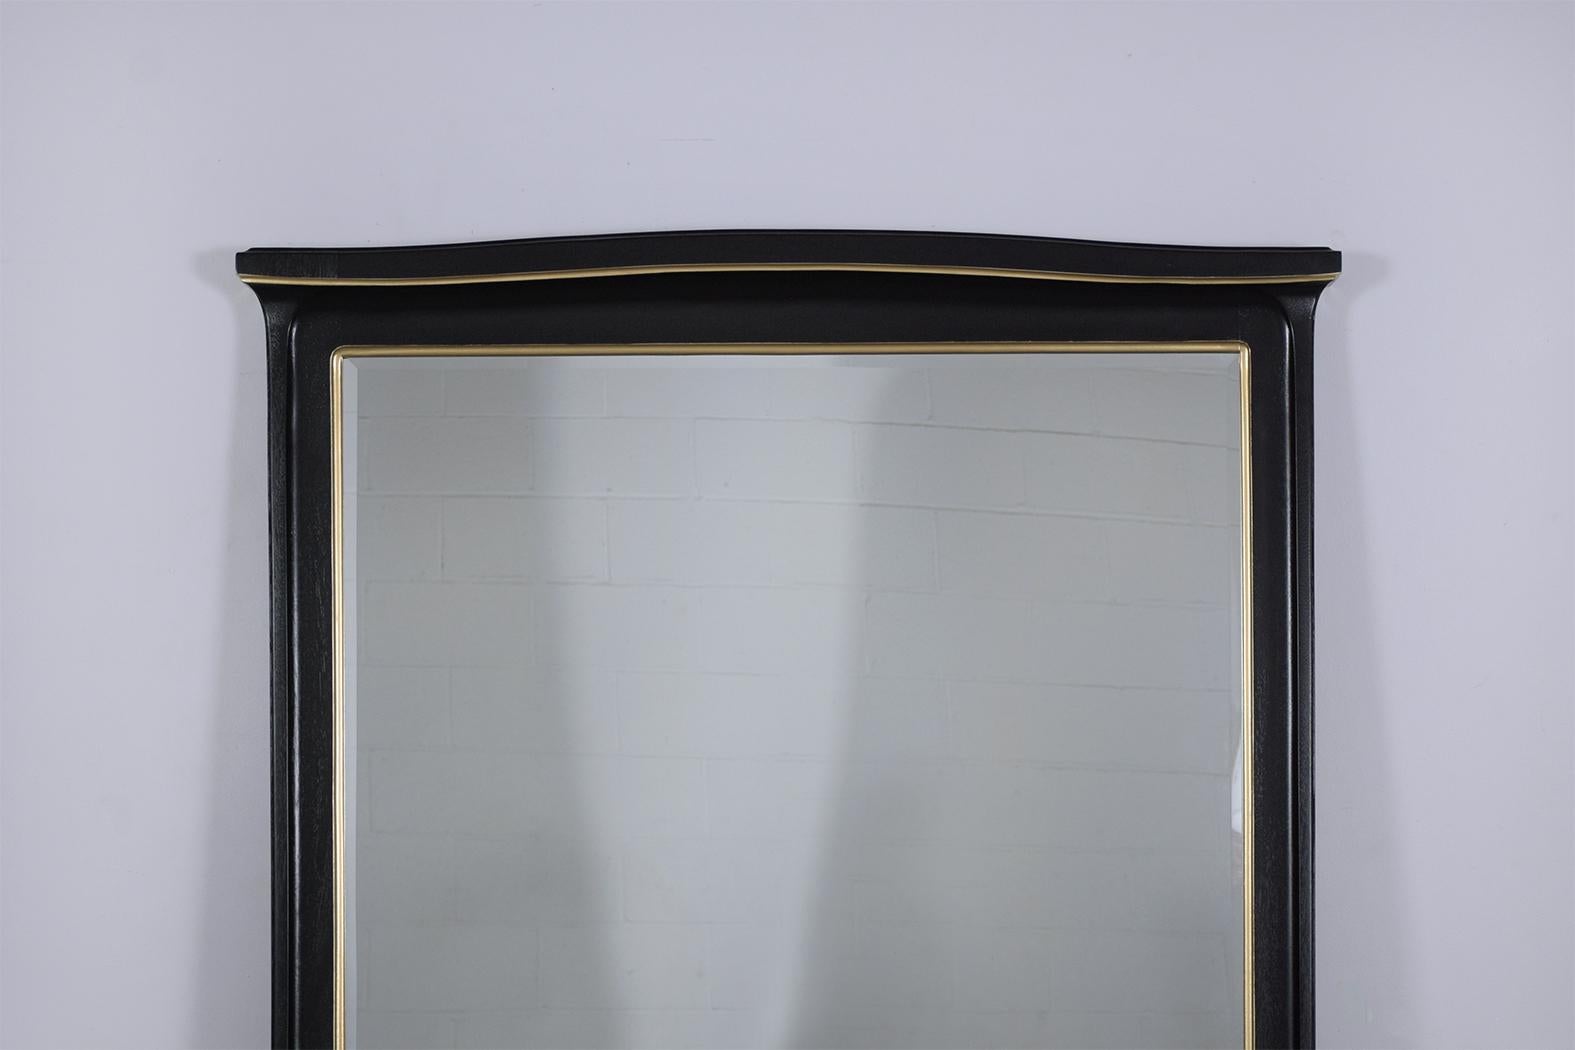 French 19th-Century Art Nouveau Mantel Mirror: Hand-Carved Mahogany with Ebonized Stain